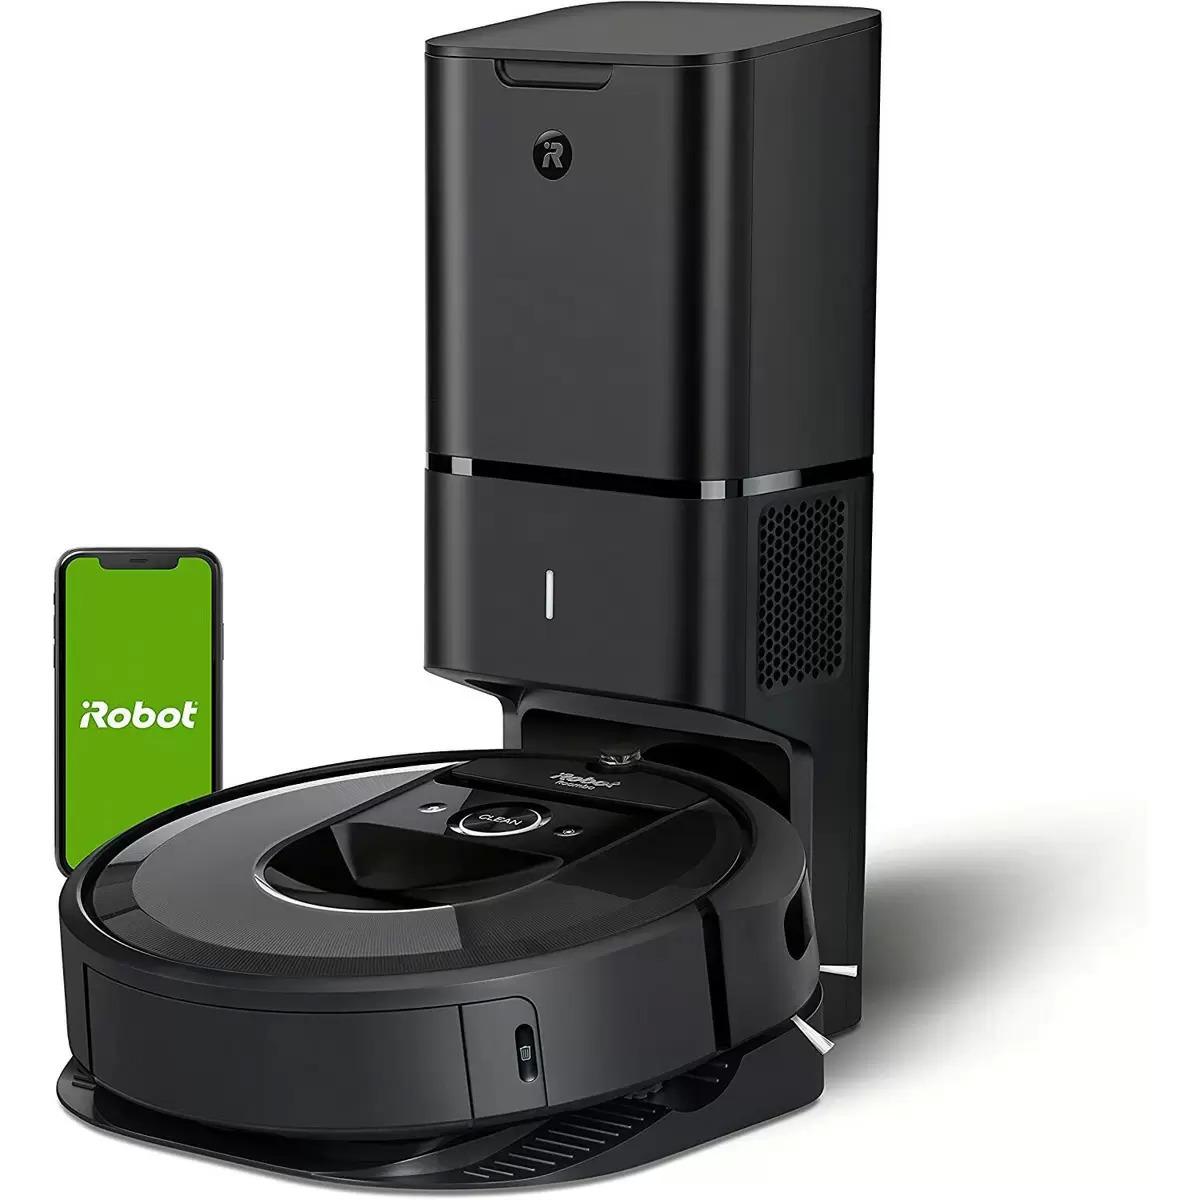 iRobot Roomba i7+ Self-Emptying Vacuum Cleaning Robot for $329.99 Shipped